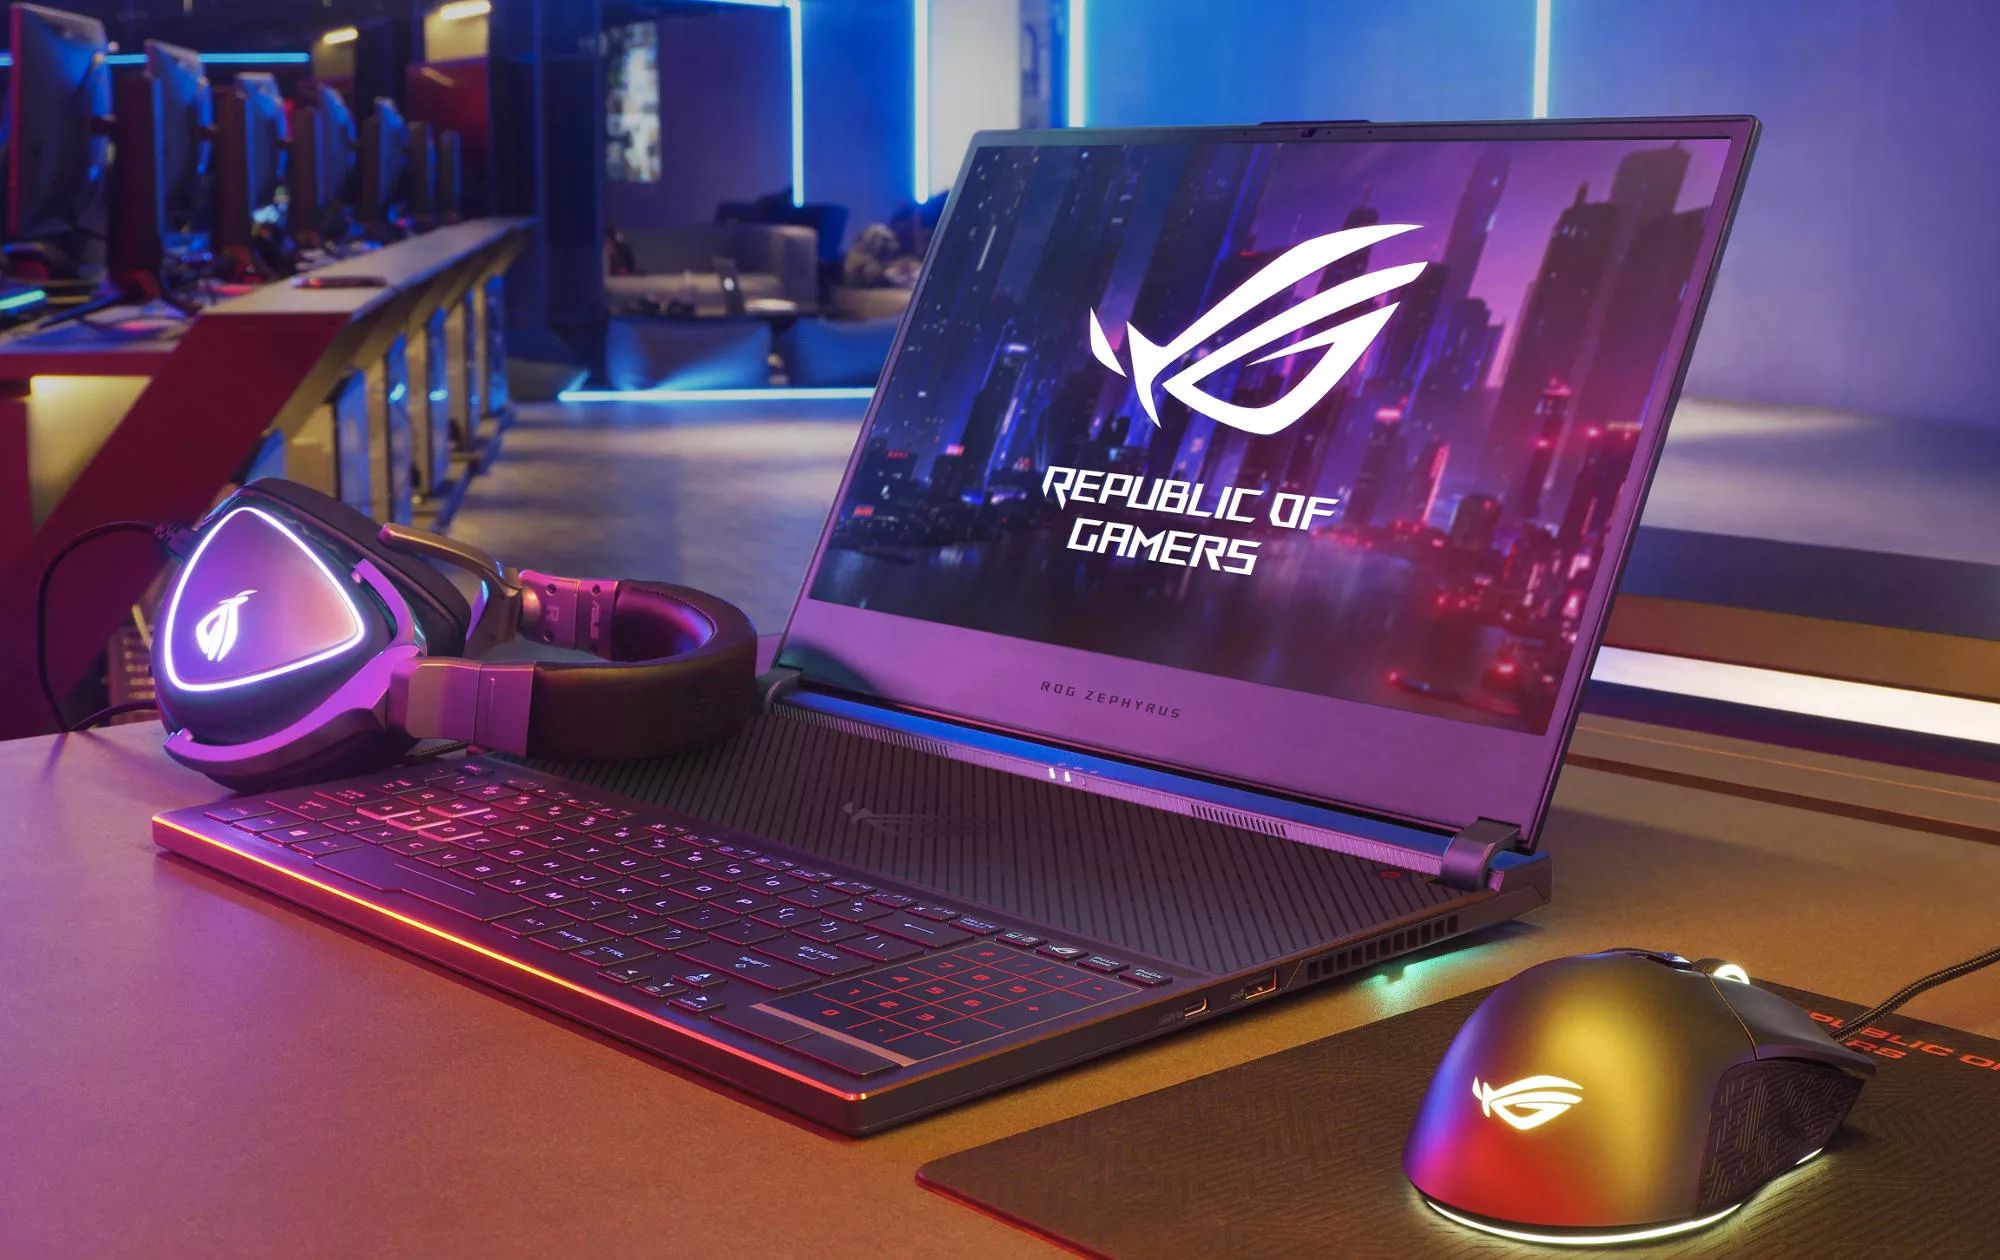 How To Put A Key Back On An ASUS Republic Of Gamers Gaming Laptop